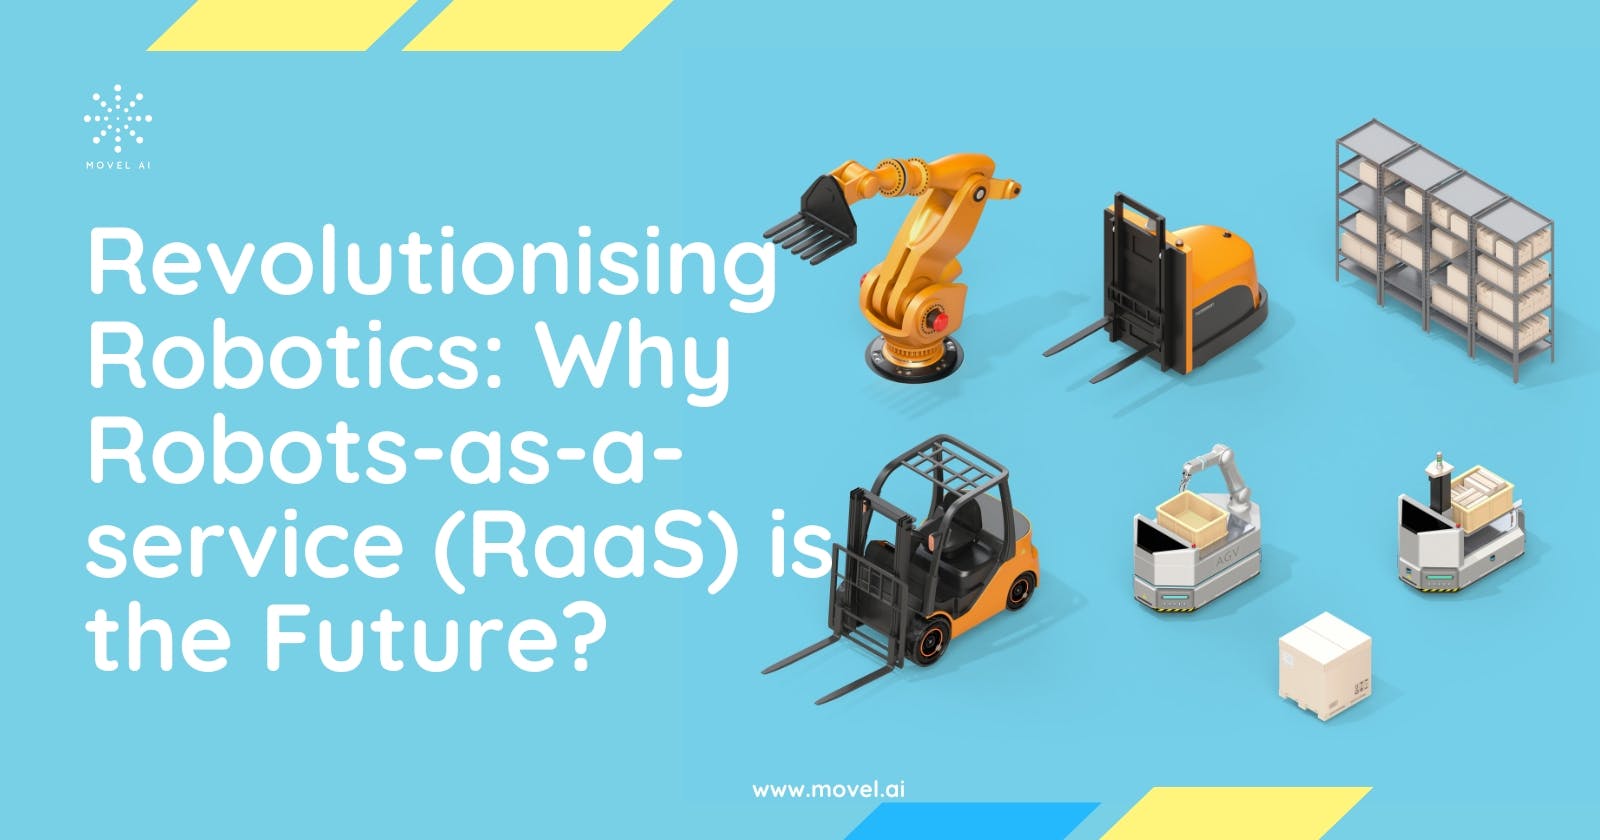 Revolutionising Robotics: Why Robots-as-a-service (RaaS) is the Future